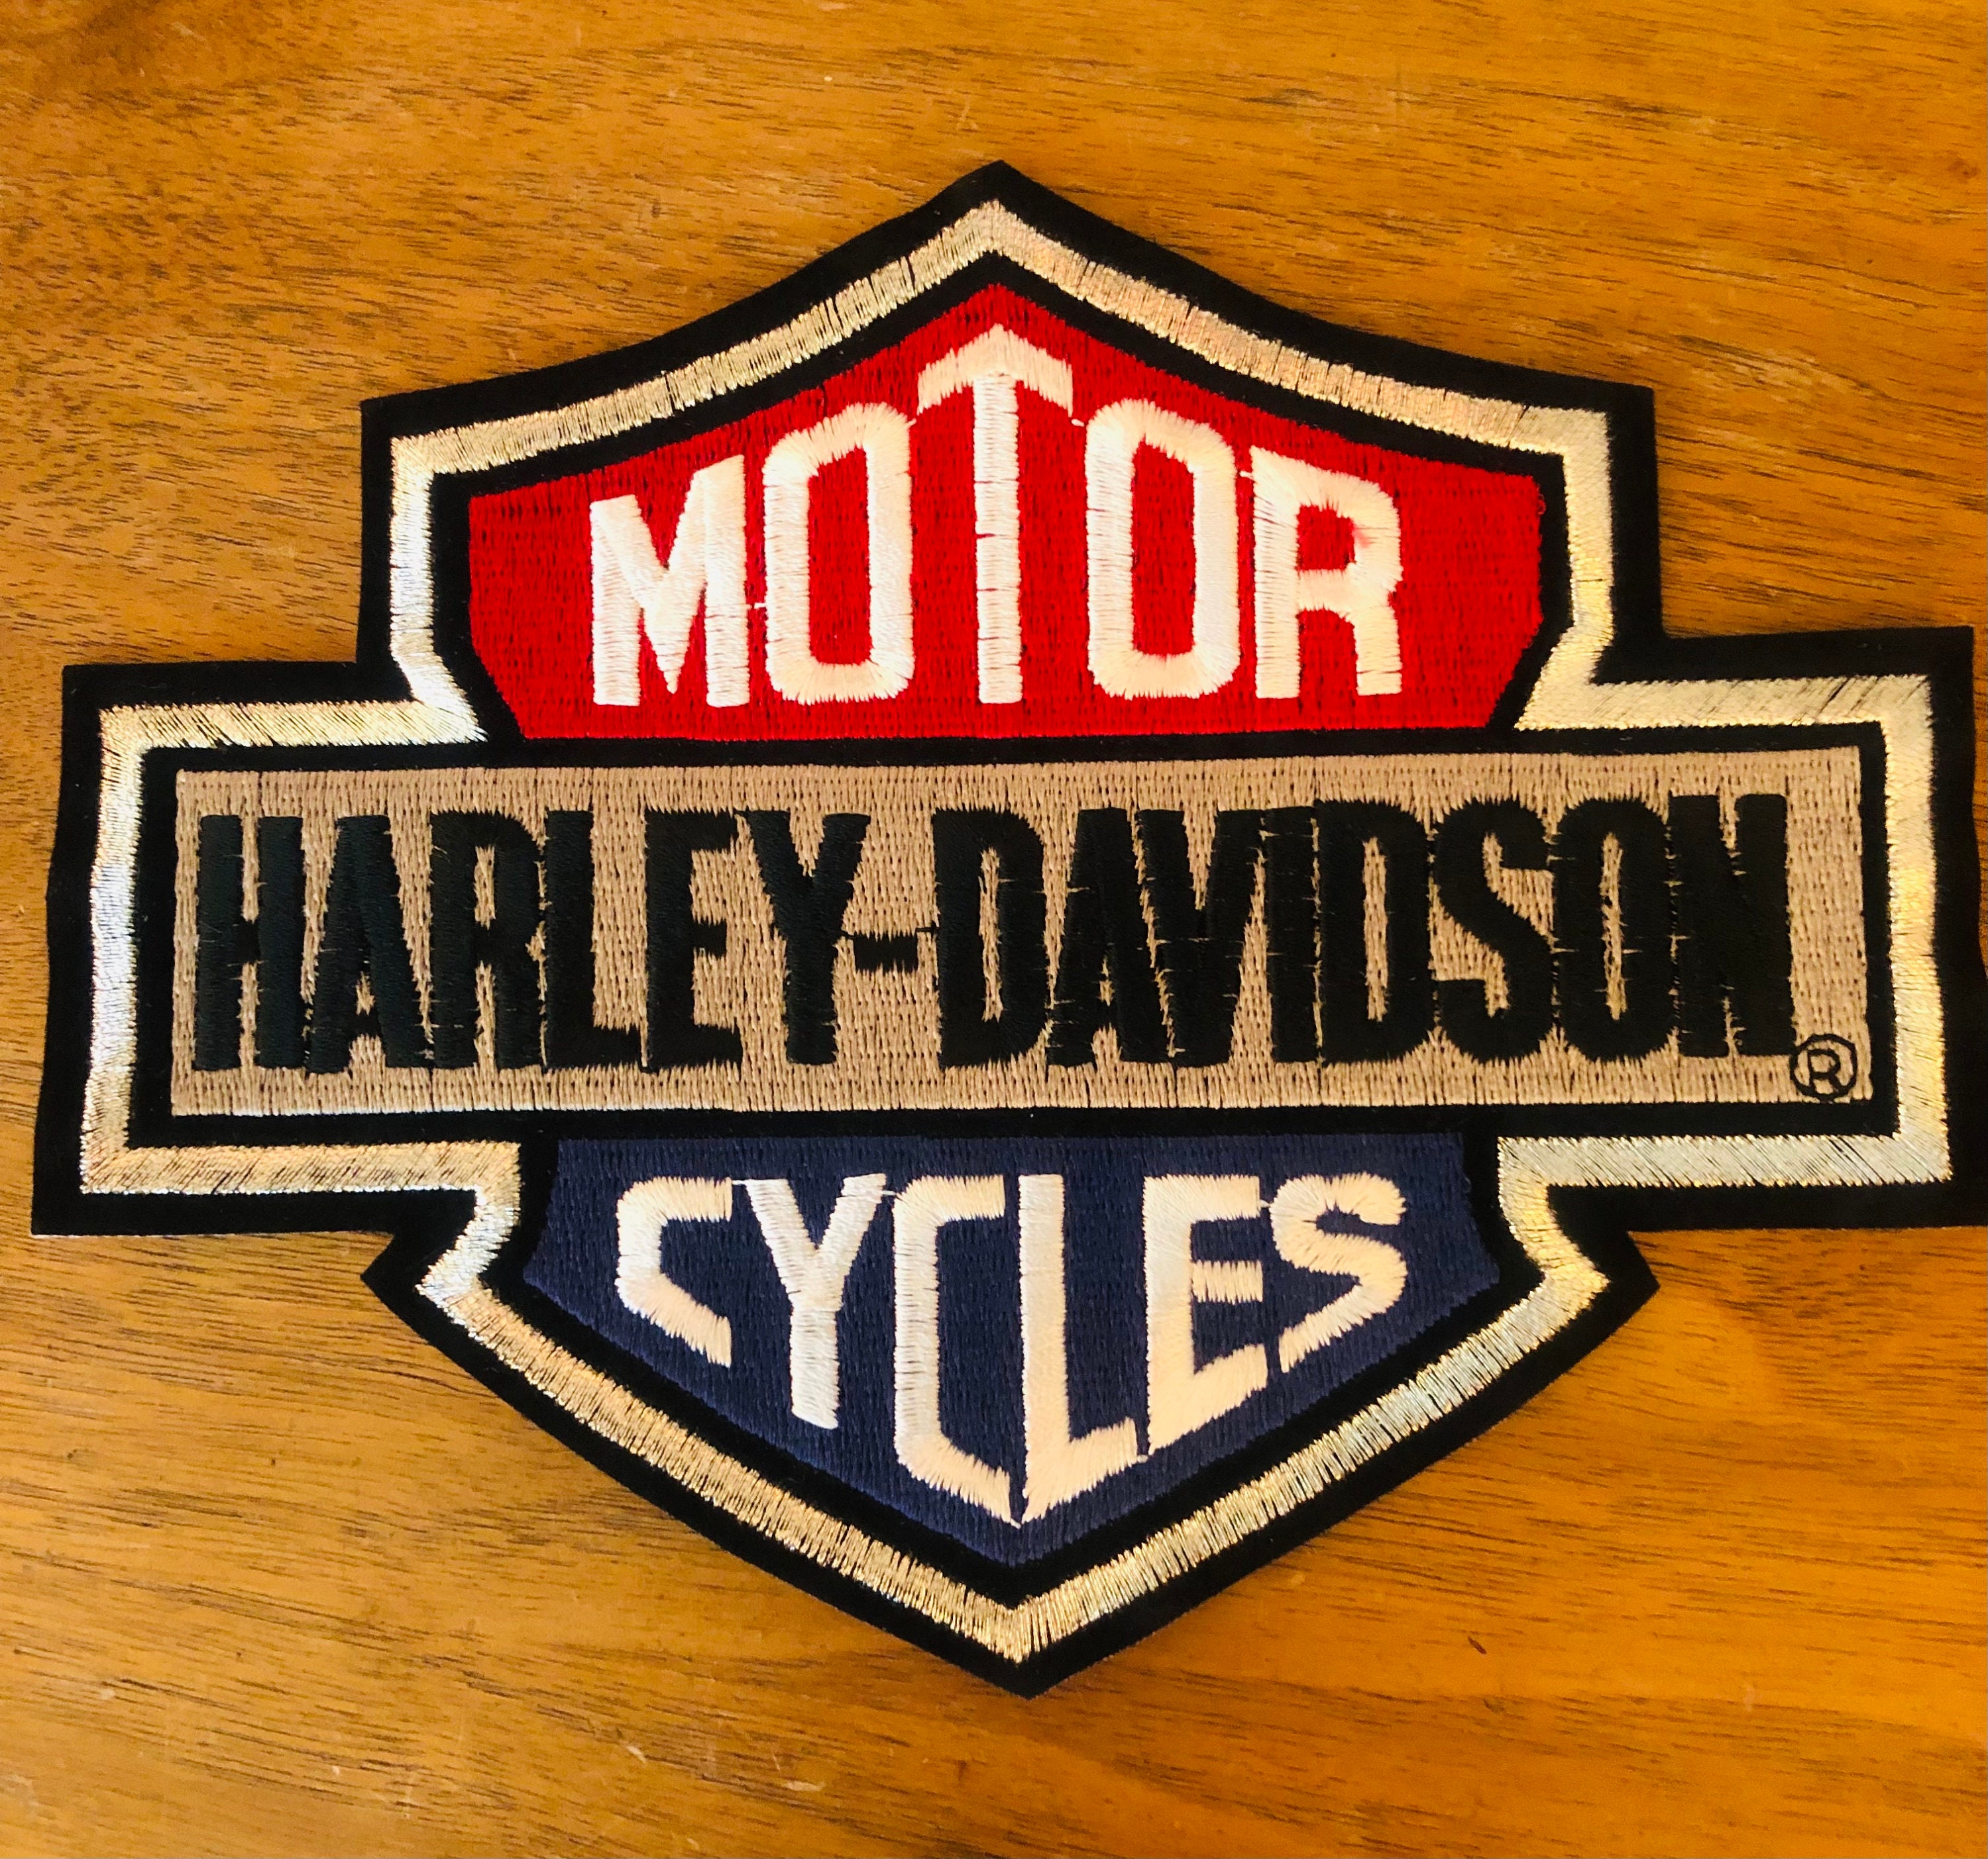 Vintage Harley Patch - Harley Davidson Classic 4 Sew-on Patch